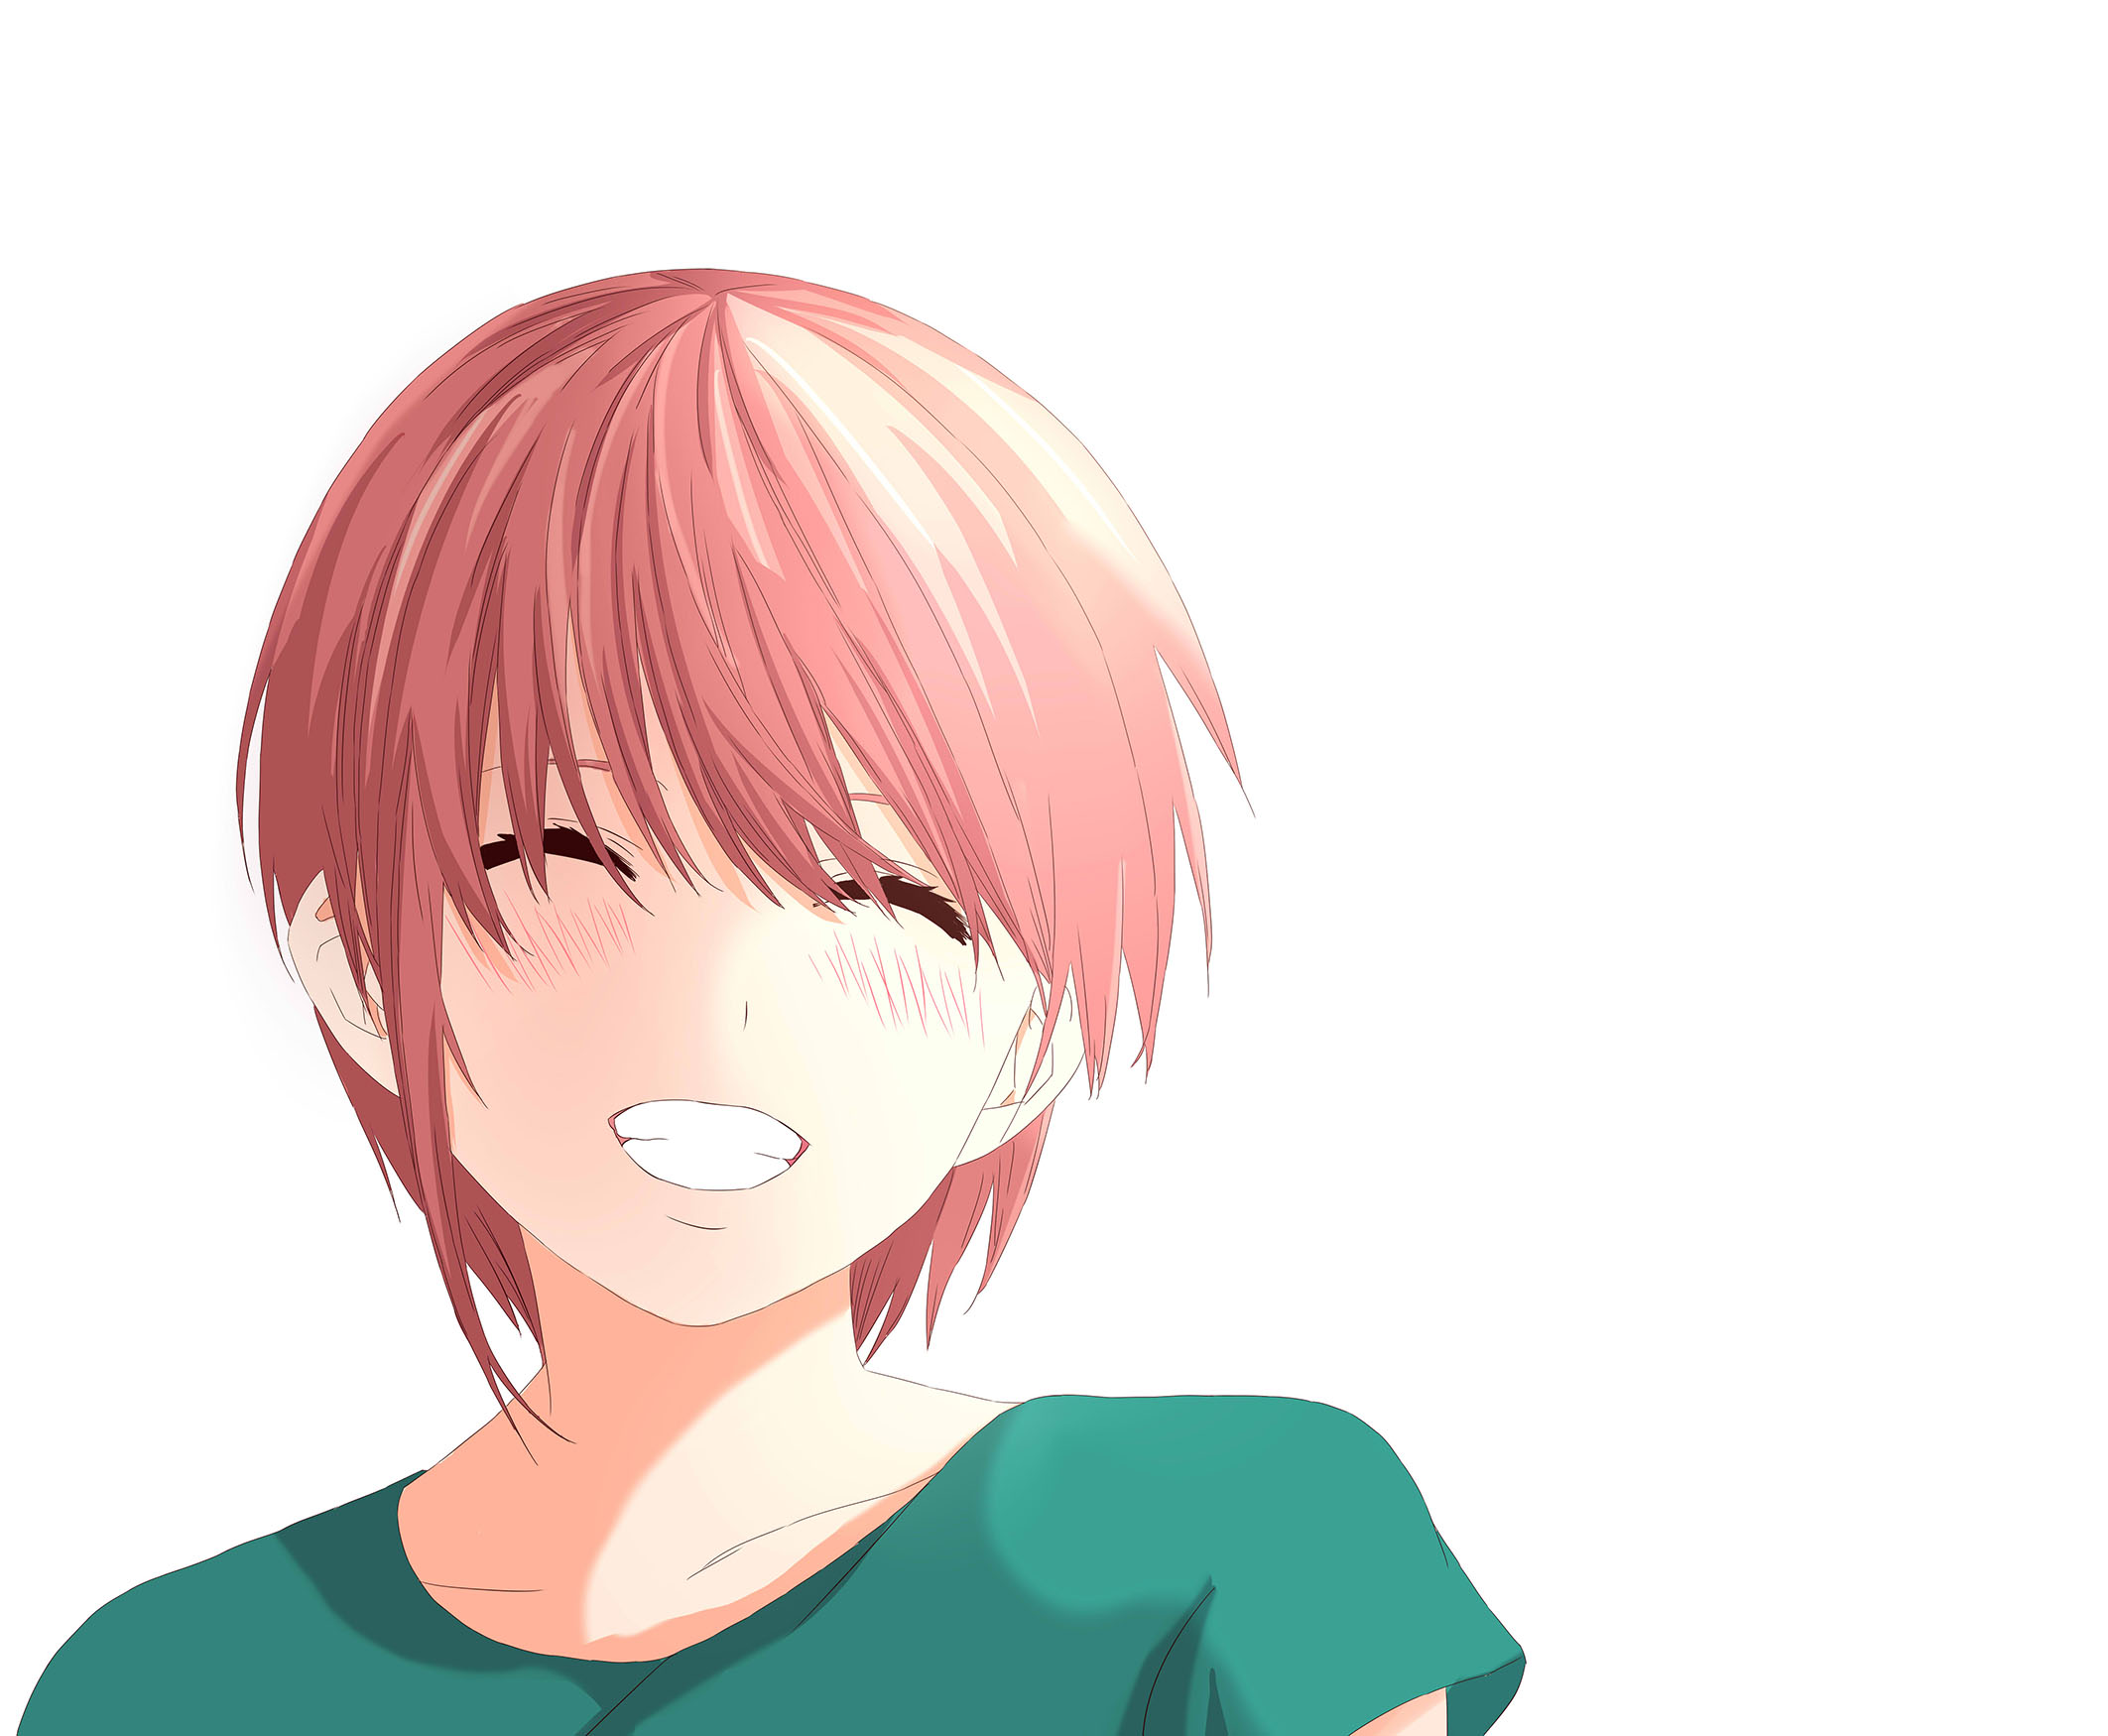 The Quintessential Quintuplets HD Wallpaper by 熬夜了没睡醒